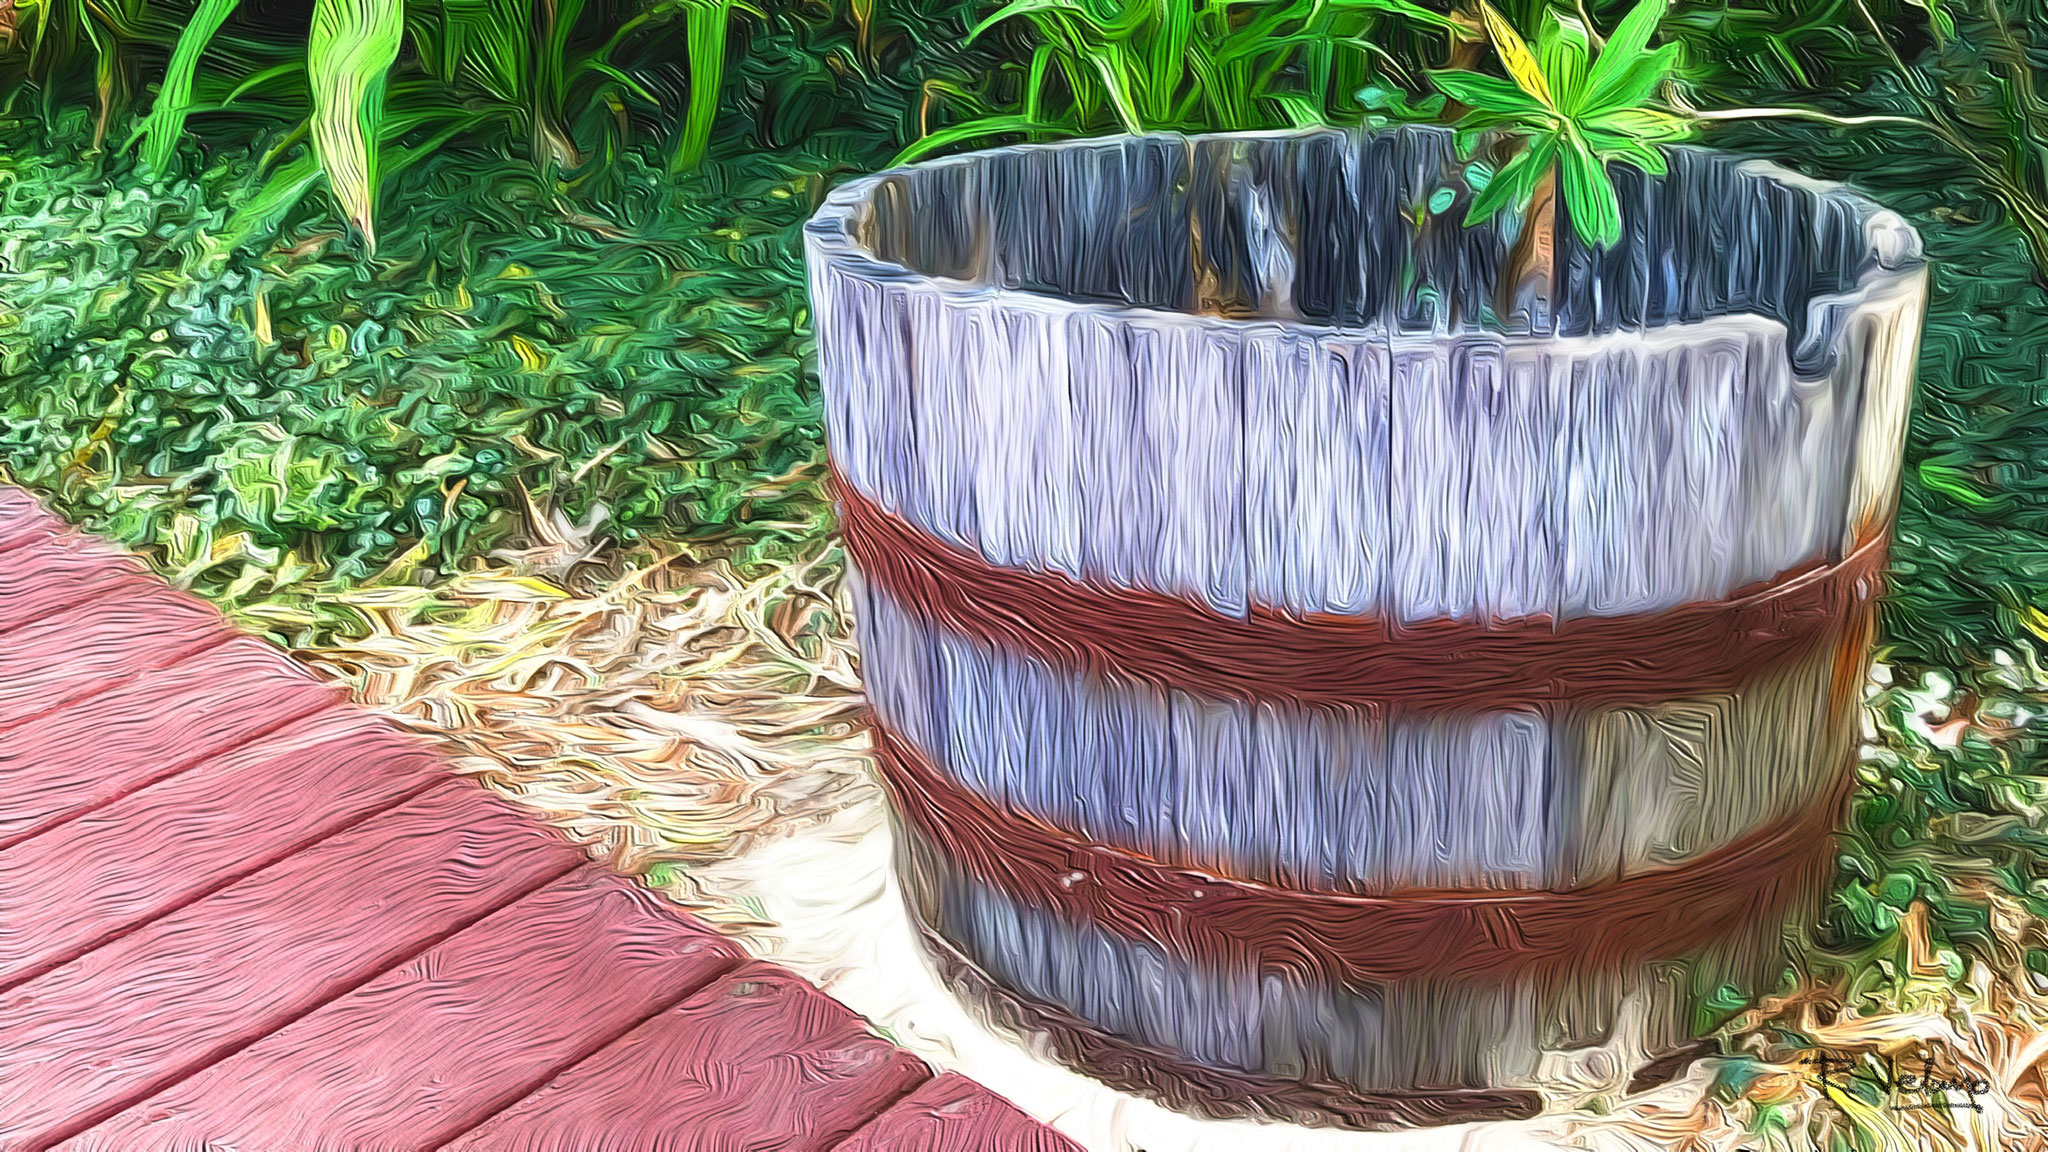 "WEATHERED WOOD BARREL PLANTER AT THE TRADEWINDS" [Created: 3/10/2020]